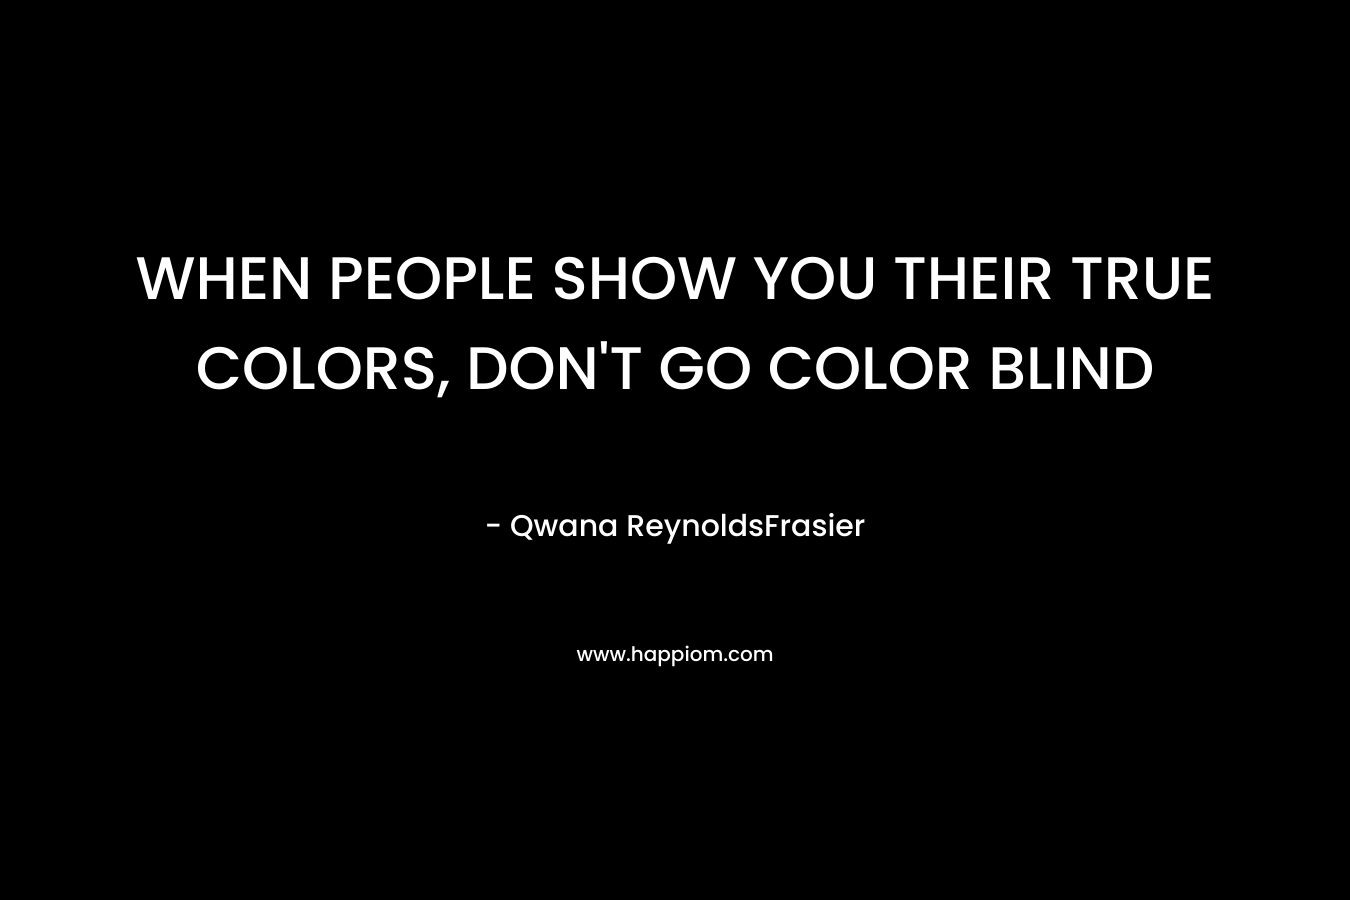 WHEN PEOPLE SHOW YOU THEIR TRUE COLORS, DON’T GO COLOR BLIND – Qwana ReynoldsFrasier